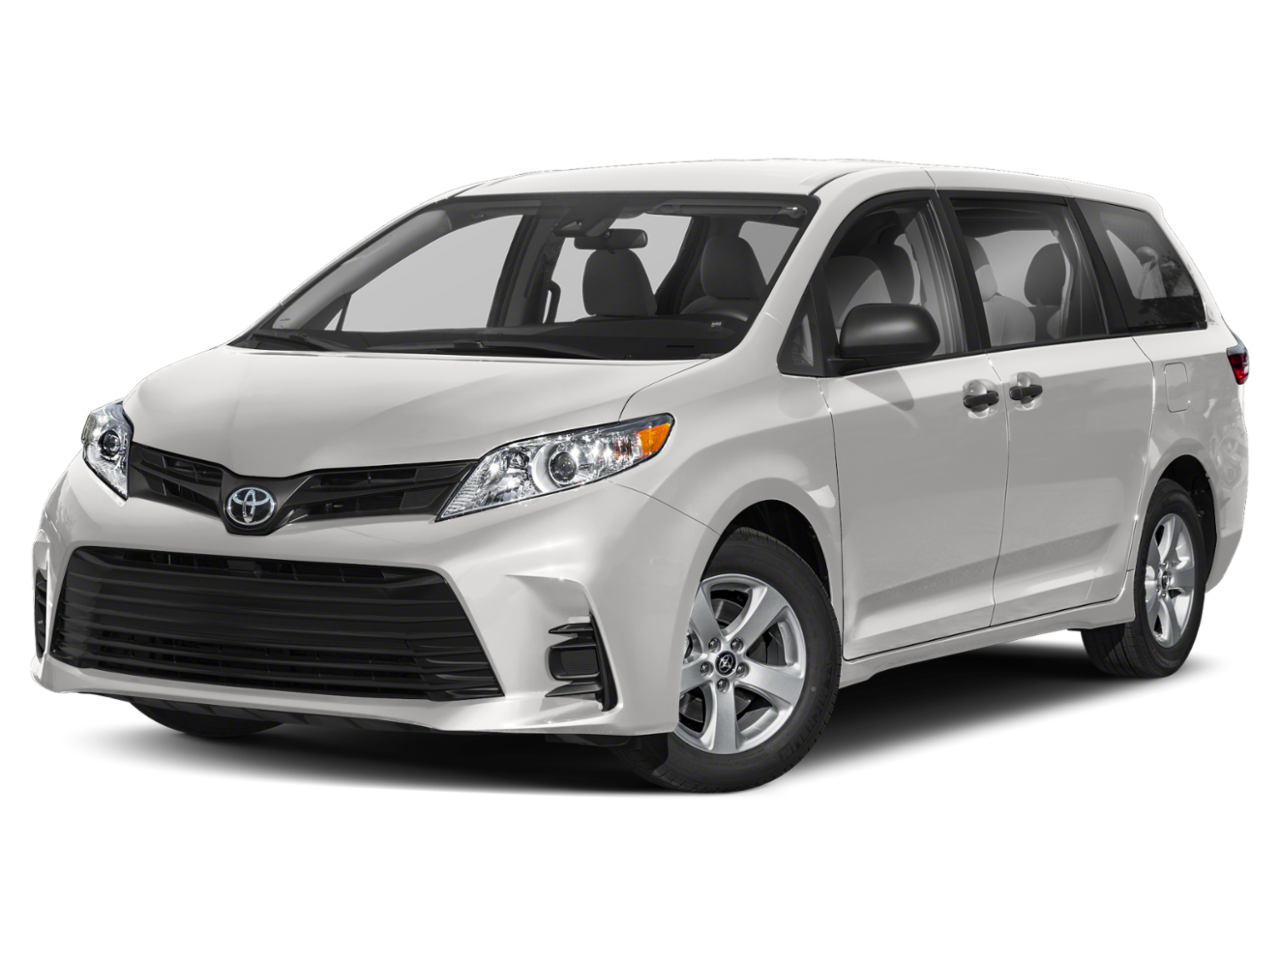 2018 Toyota Sienna Repair: Service and Maintenance Cost